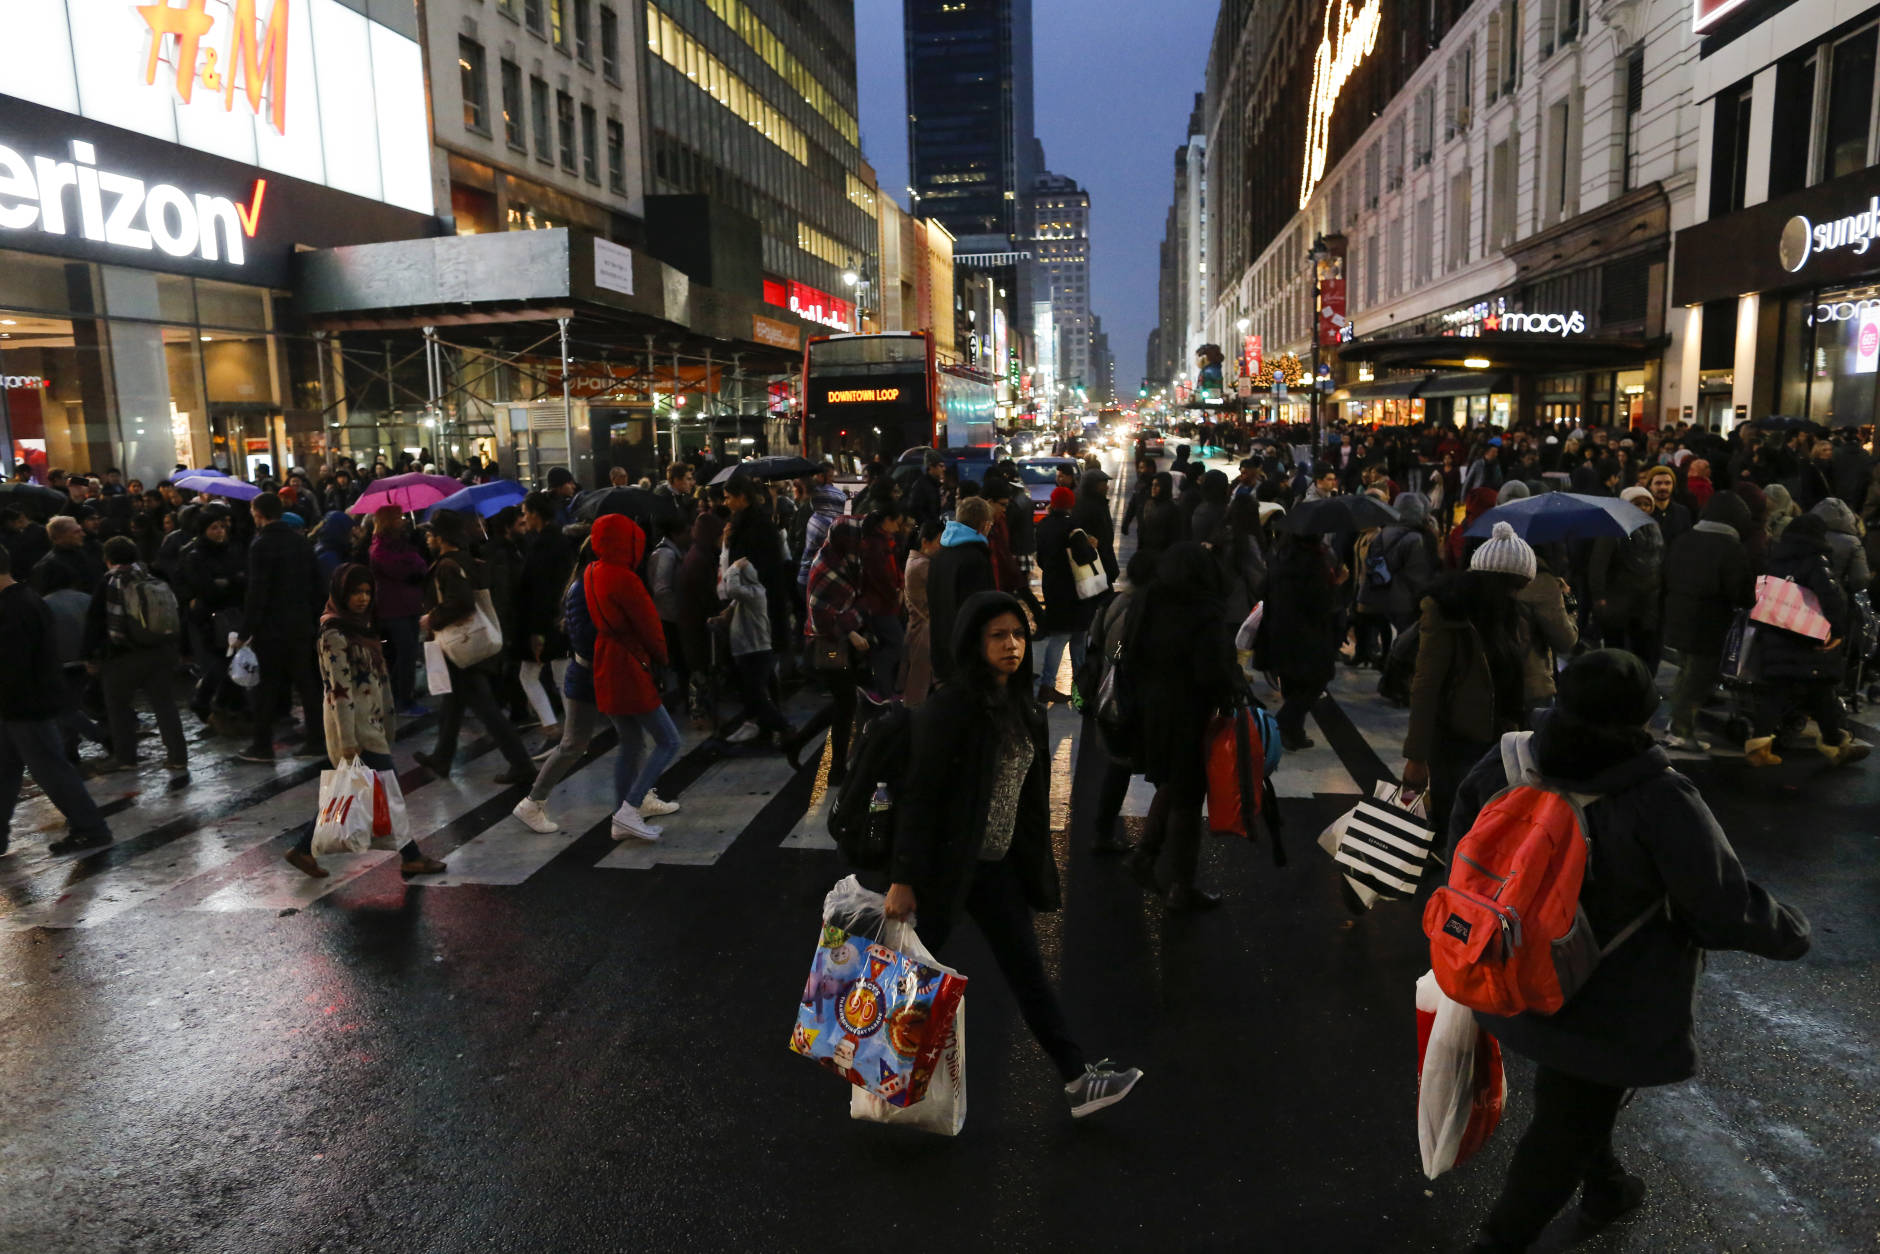 NEW YORK, NY - NOVEMBER 25:  Shoppers cross the street carrying retail bags during Black Friday events on November 25, 2016 in New York City.  The day after Thanksgiving, called Black Friday, is typically the biggest shopping day of the year in the United States. (Photo by Eduardo Munoz Alvarez/Getty Images)